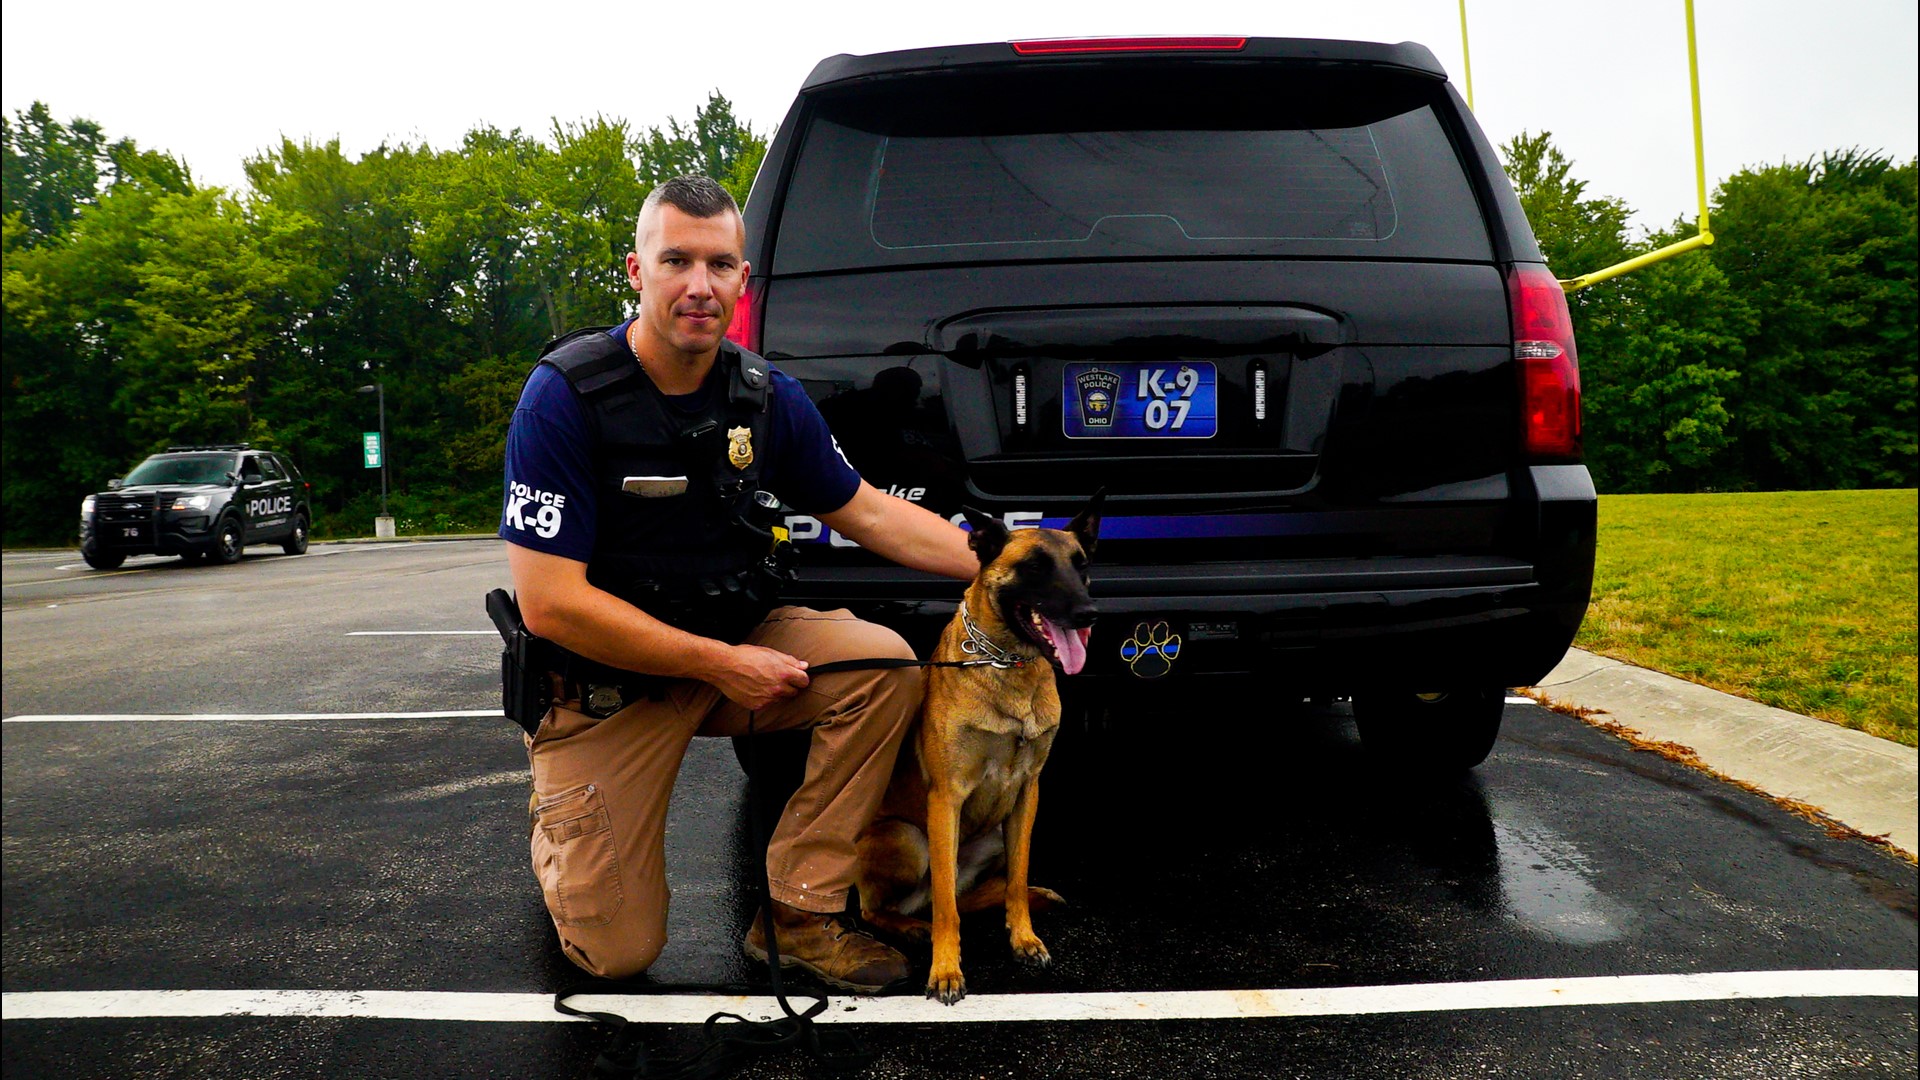 Hardworking Cleveland is a WKYC digital web-series about Clevelanders hard at work. This story is with Westlake Ptl. Officer JP Toth and his K-9 Timmy.